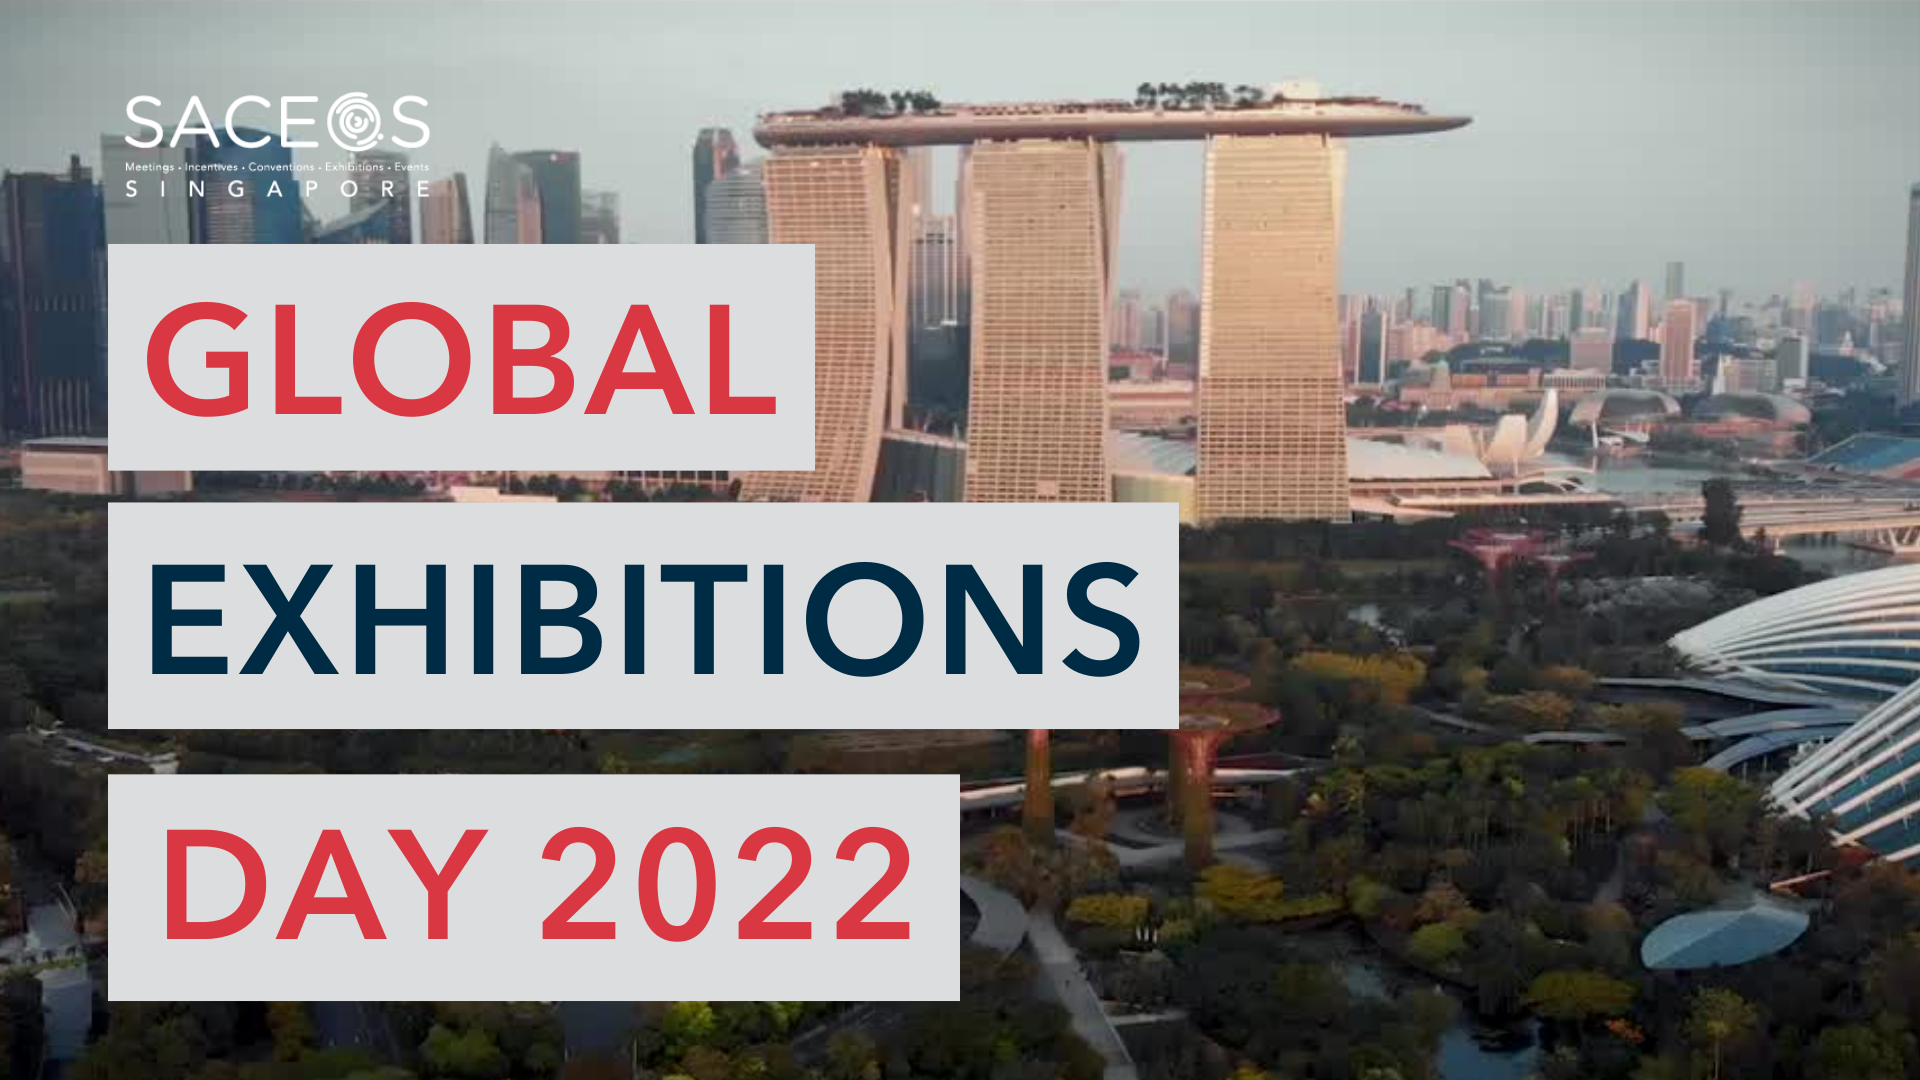 Happy Global Exhibitions Day 2022!